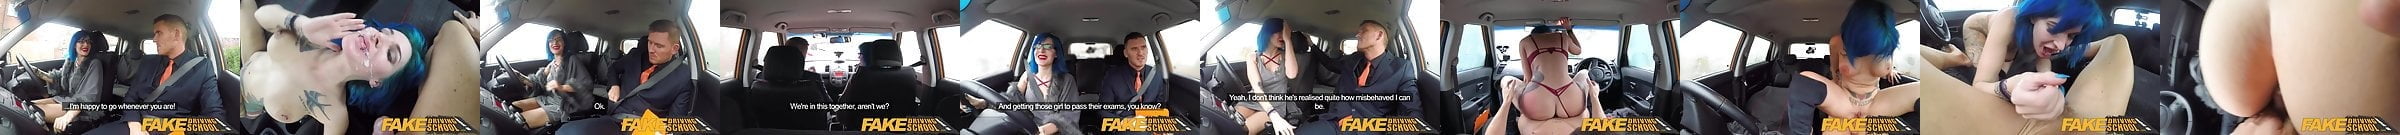 Fake Driving School Wild Ride For Tattooed Busty Beauty